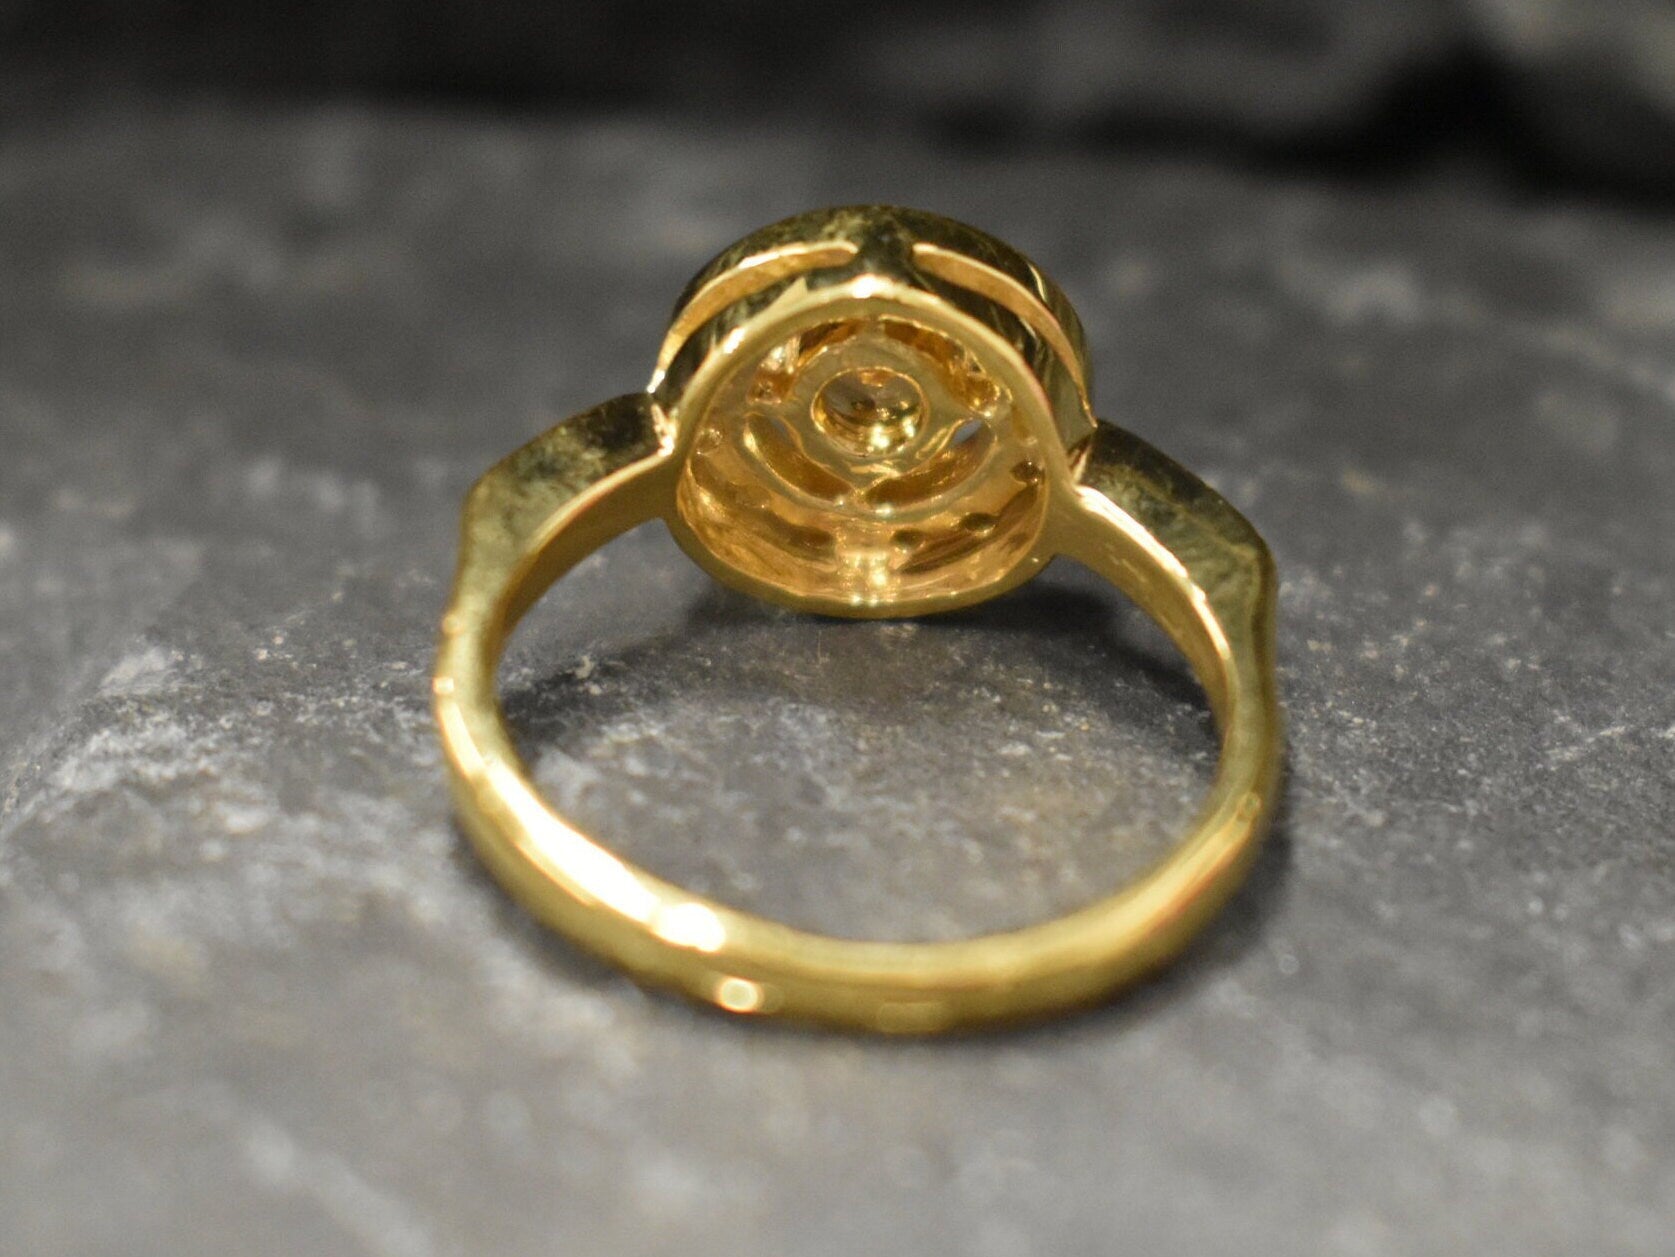 Gold Citrine Ring, Citrine Ring, Natural Citrine, November Ring, Gold Solitaire Ring, Vintage Gold Ring, Yellow Dimond Ring, 925 Silver Ring